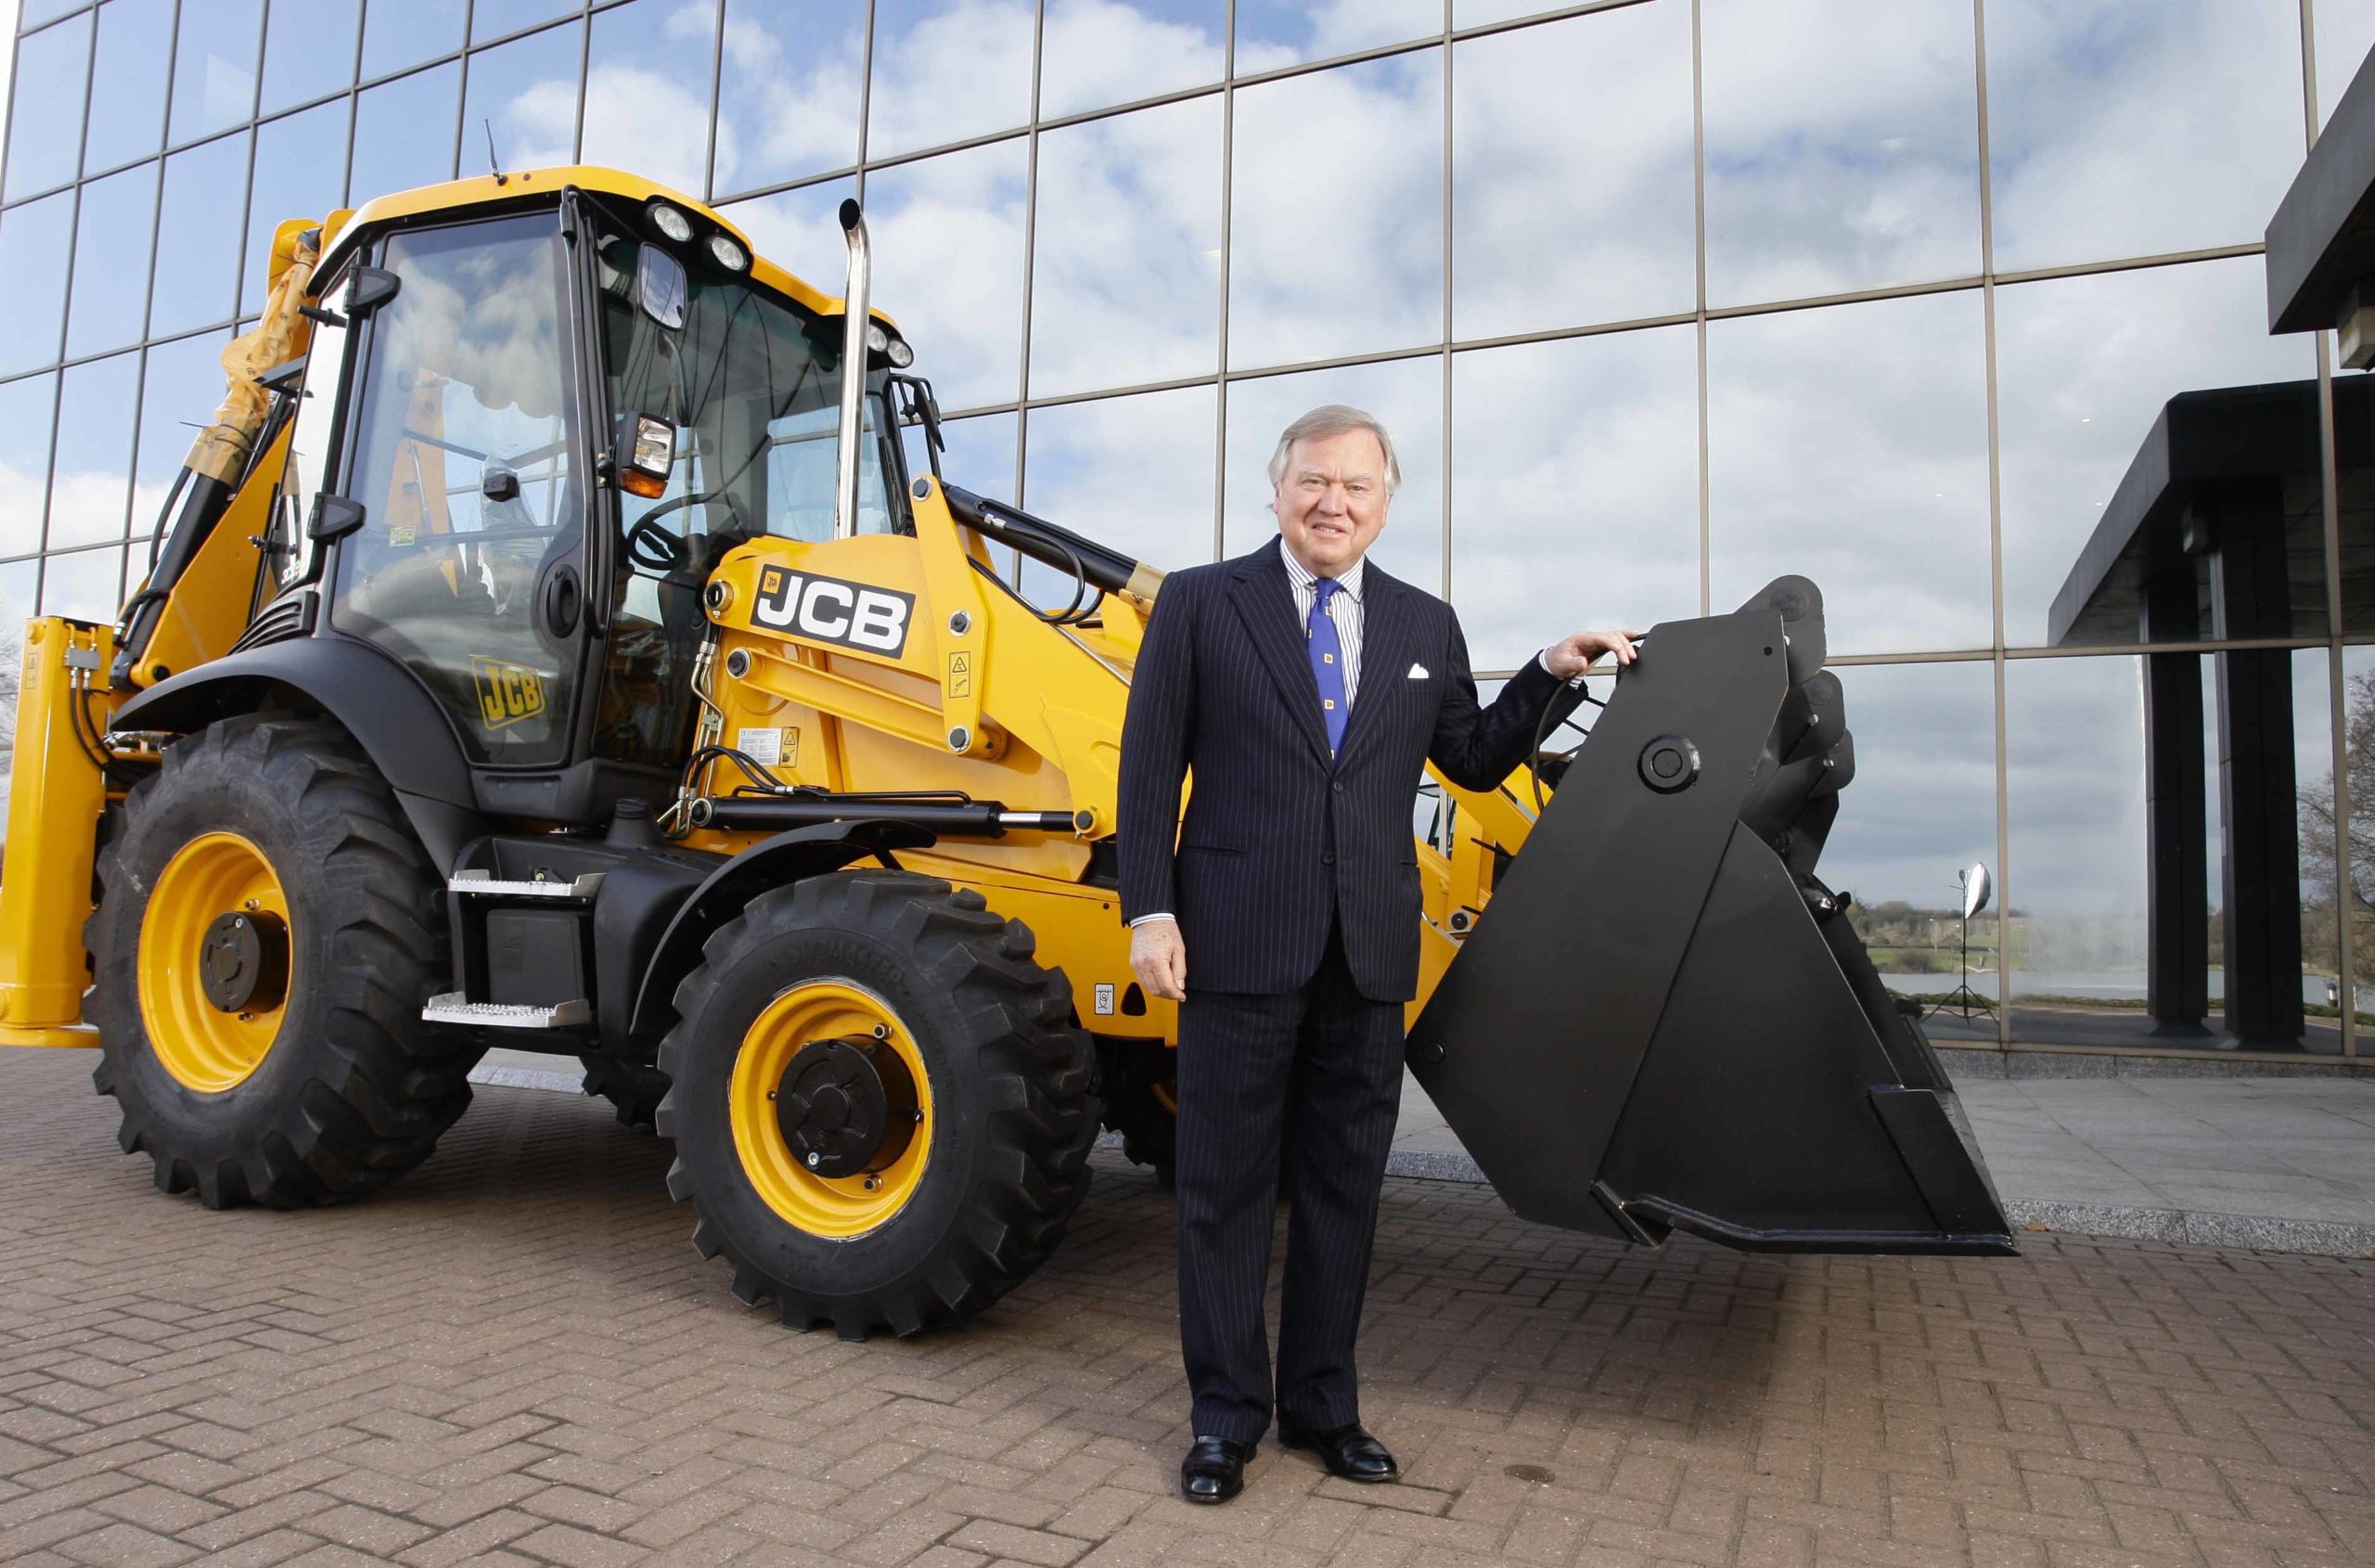 Make it on your own, JCB tycoon Lord Bamford told his son Georgeso he  did